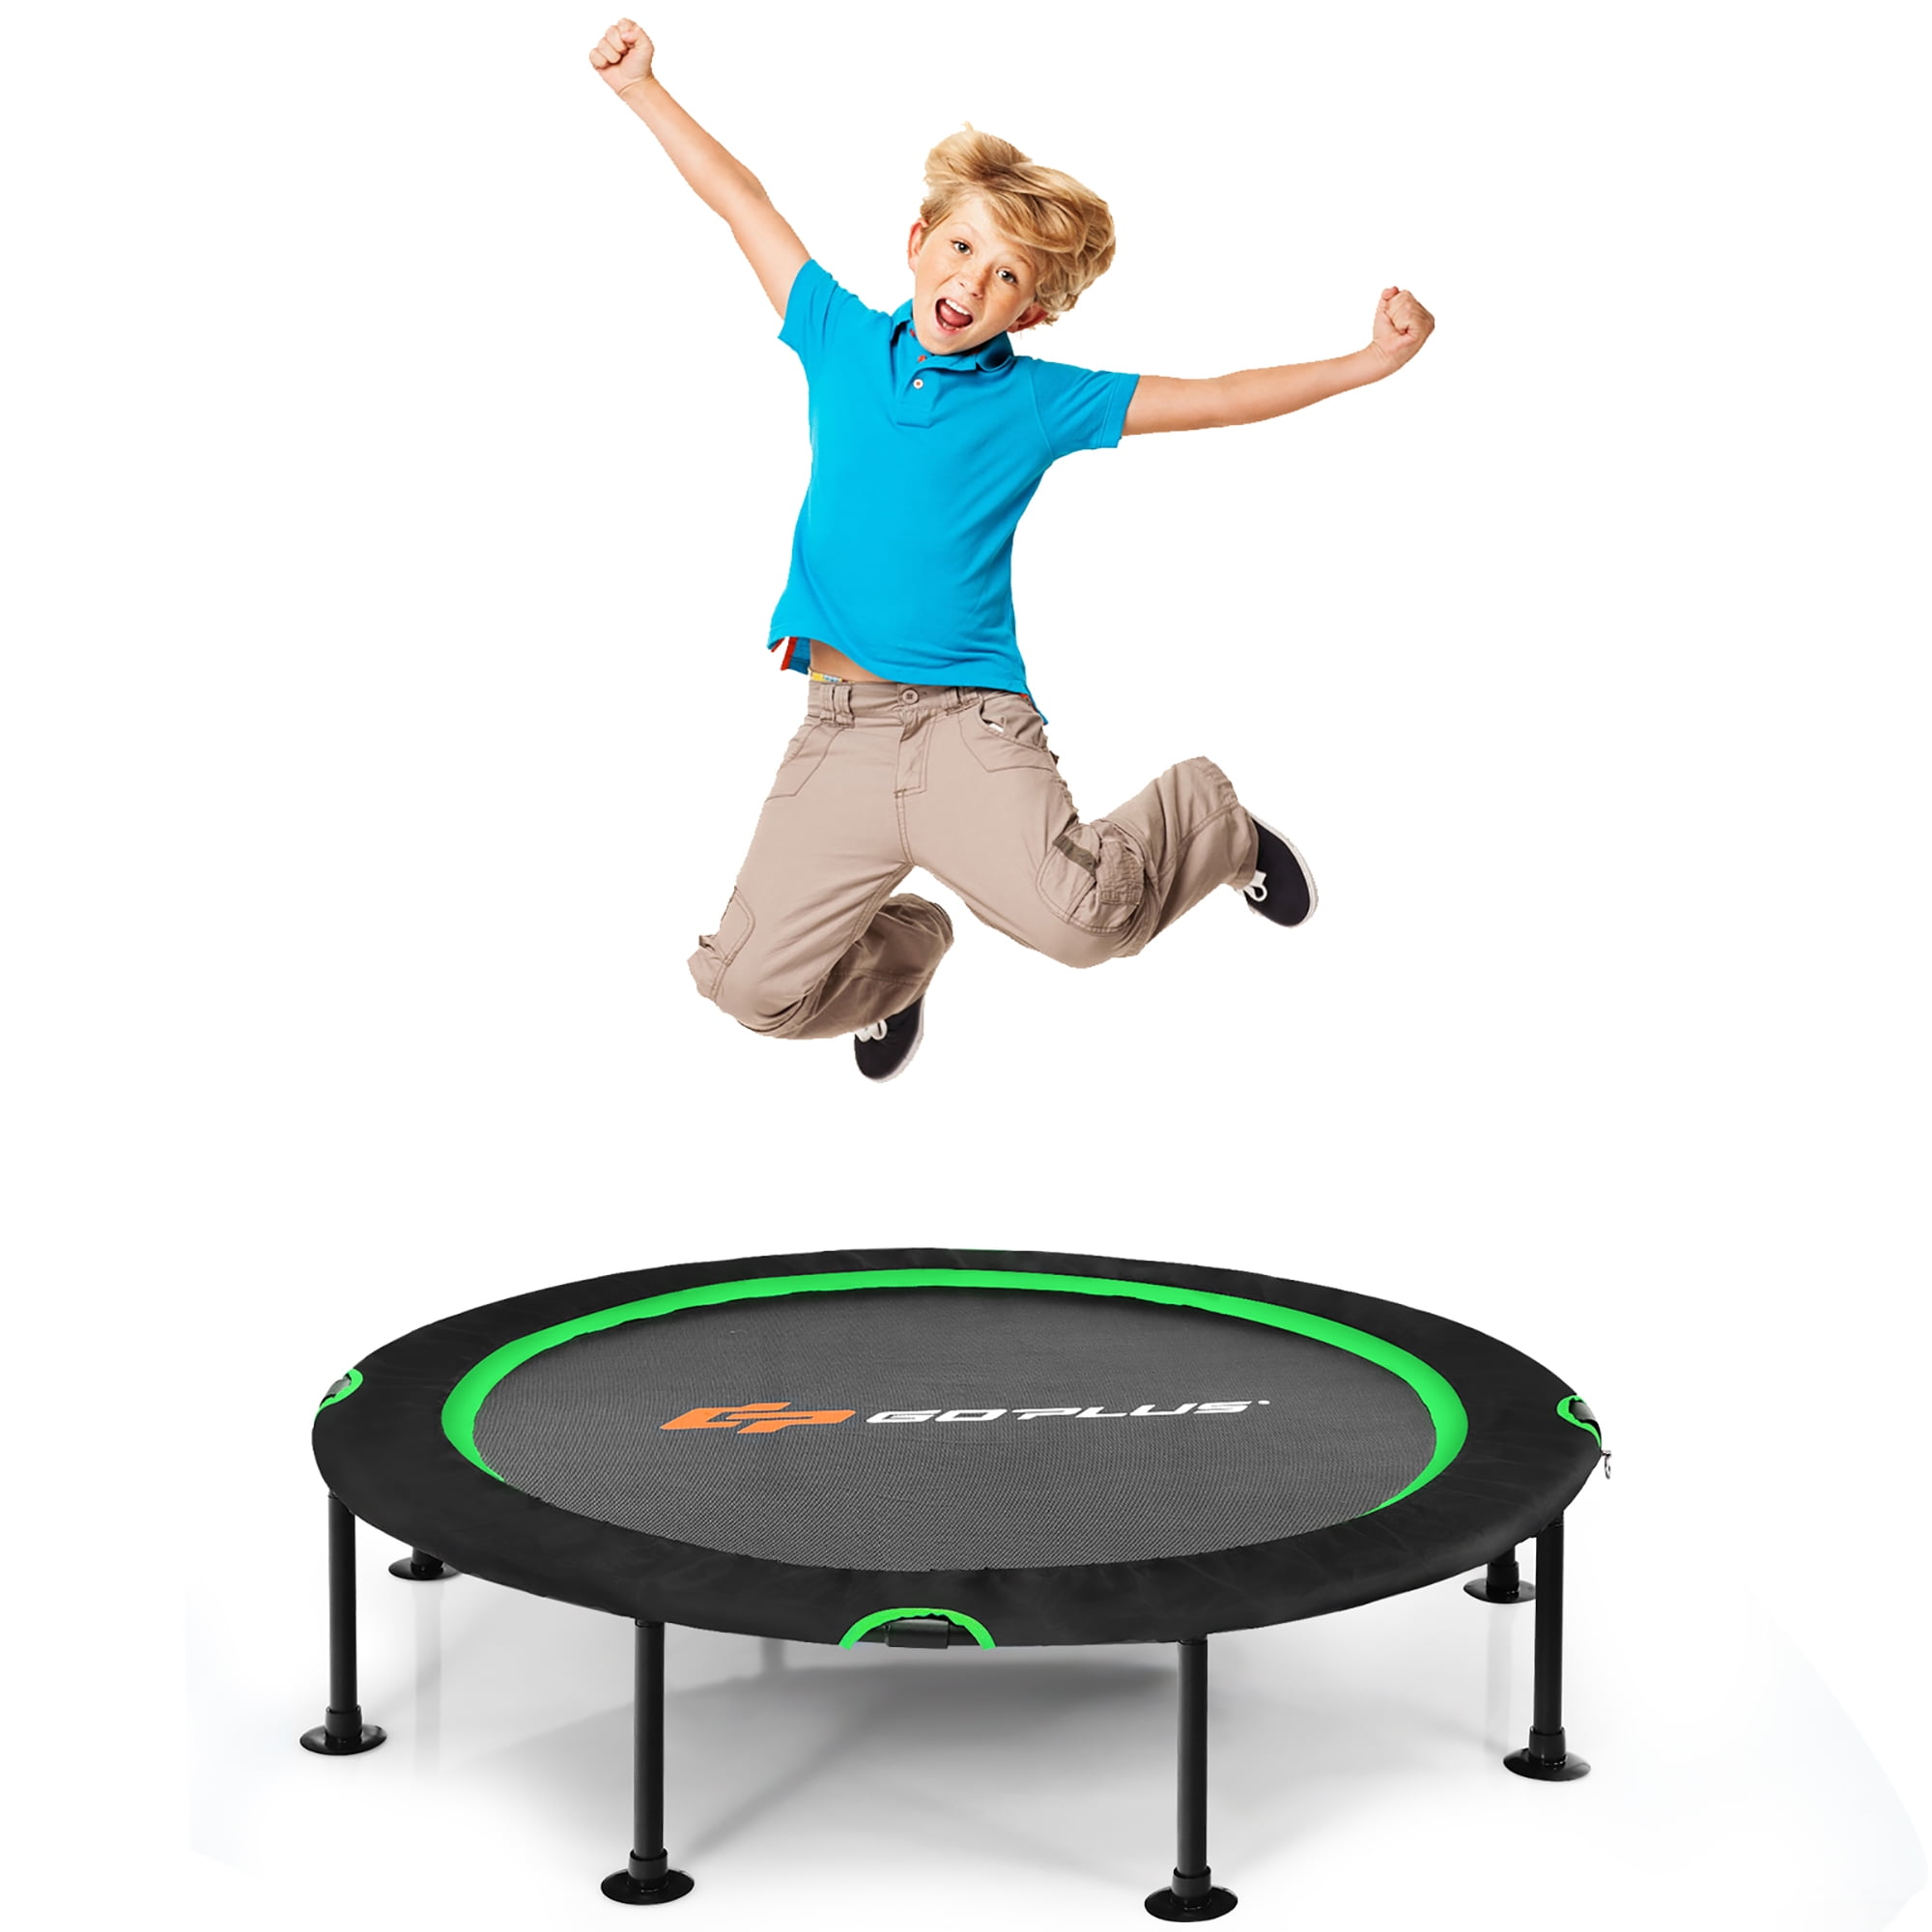 Goplus 50 Hexagonal Fitness Trampoline Silent Exercise Mini Trampoline with Safety Pads & Durable Bungee Cords Outdoor Indoor Rebounder for Adults Kids Jumping Cardio Workout Trainning 